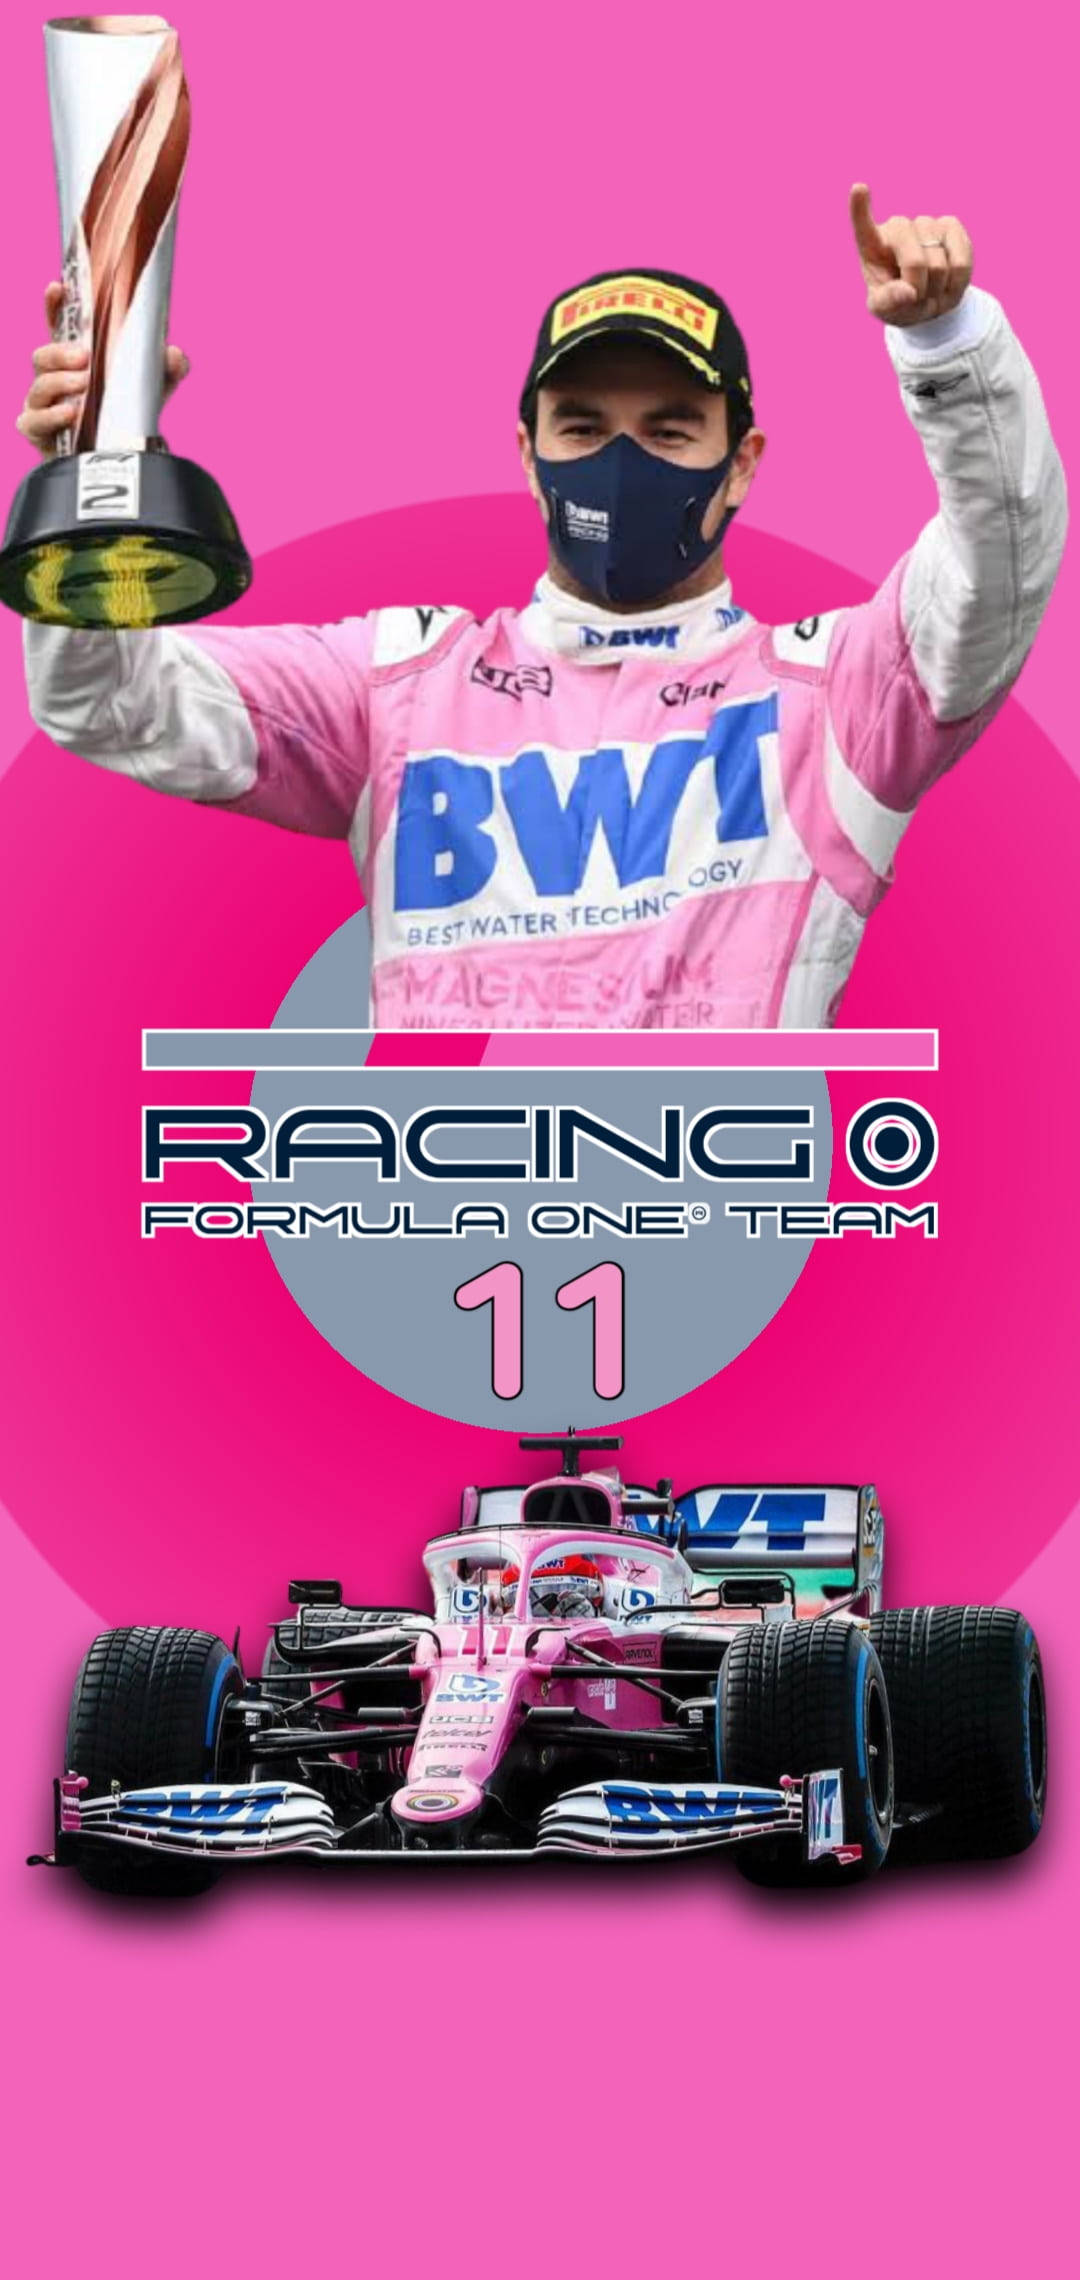 Professional racing driver Sergio Perez in action on a vibrant pink background. Wallpaper